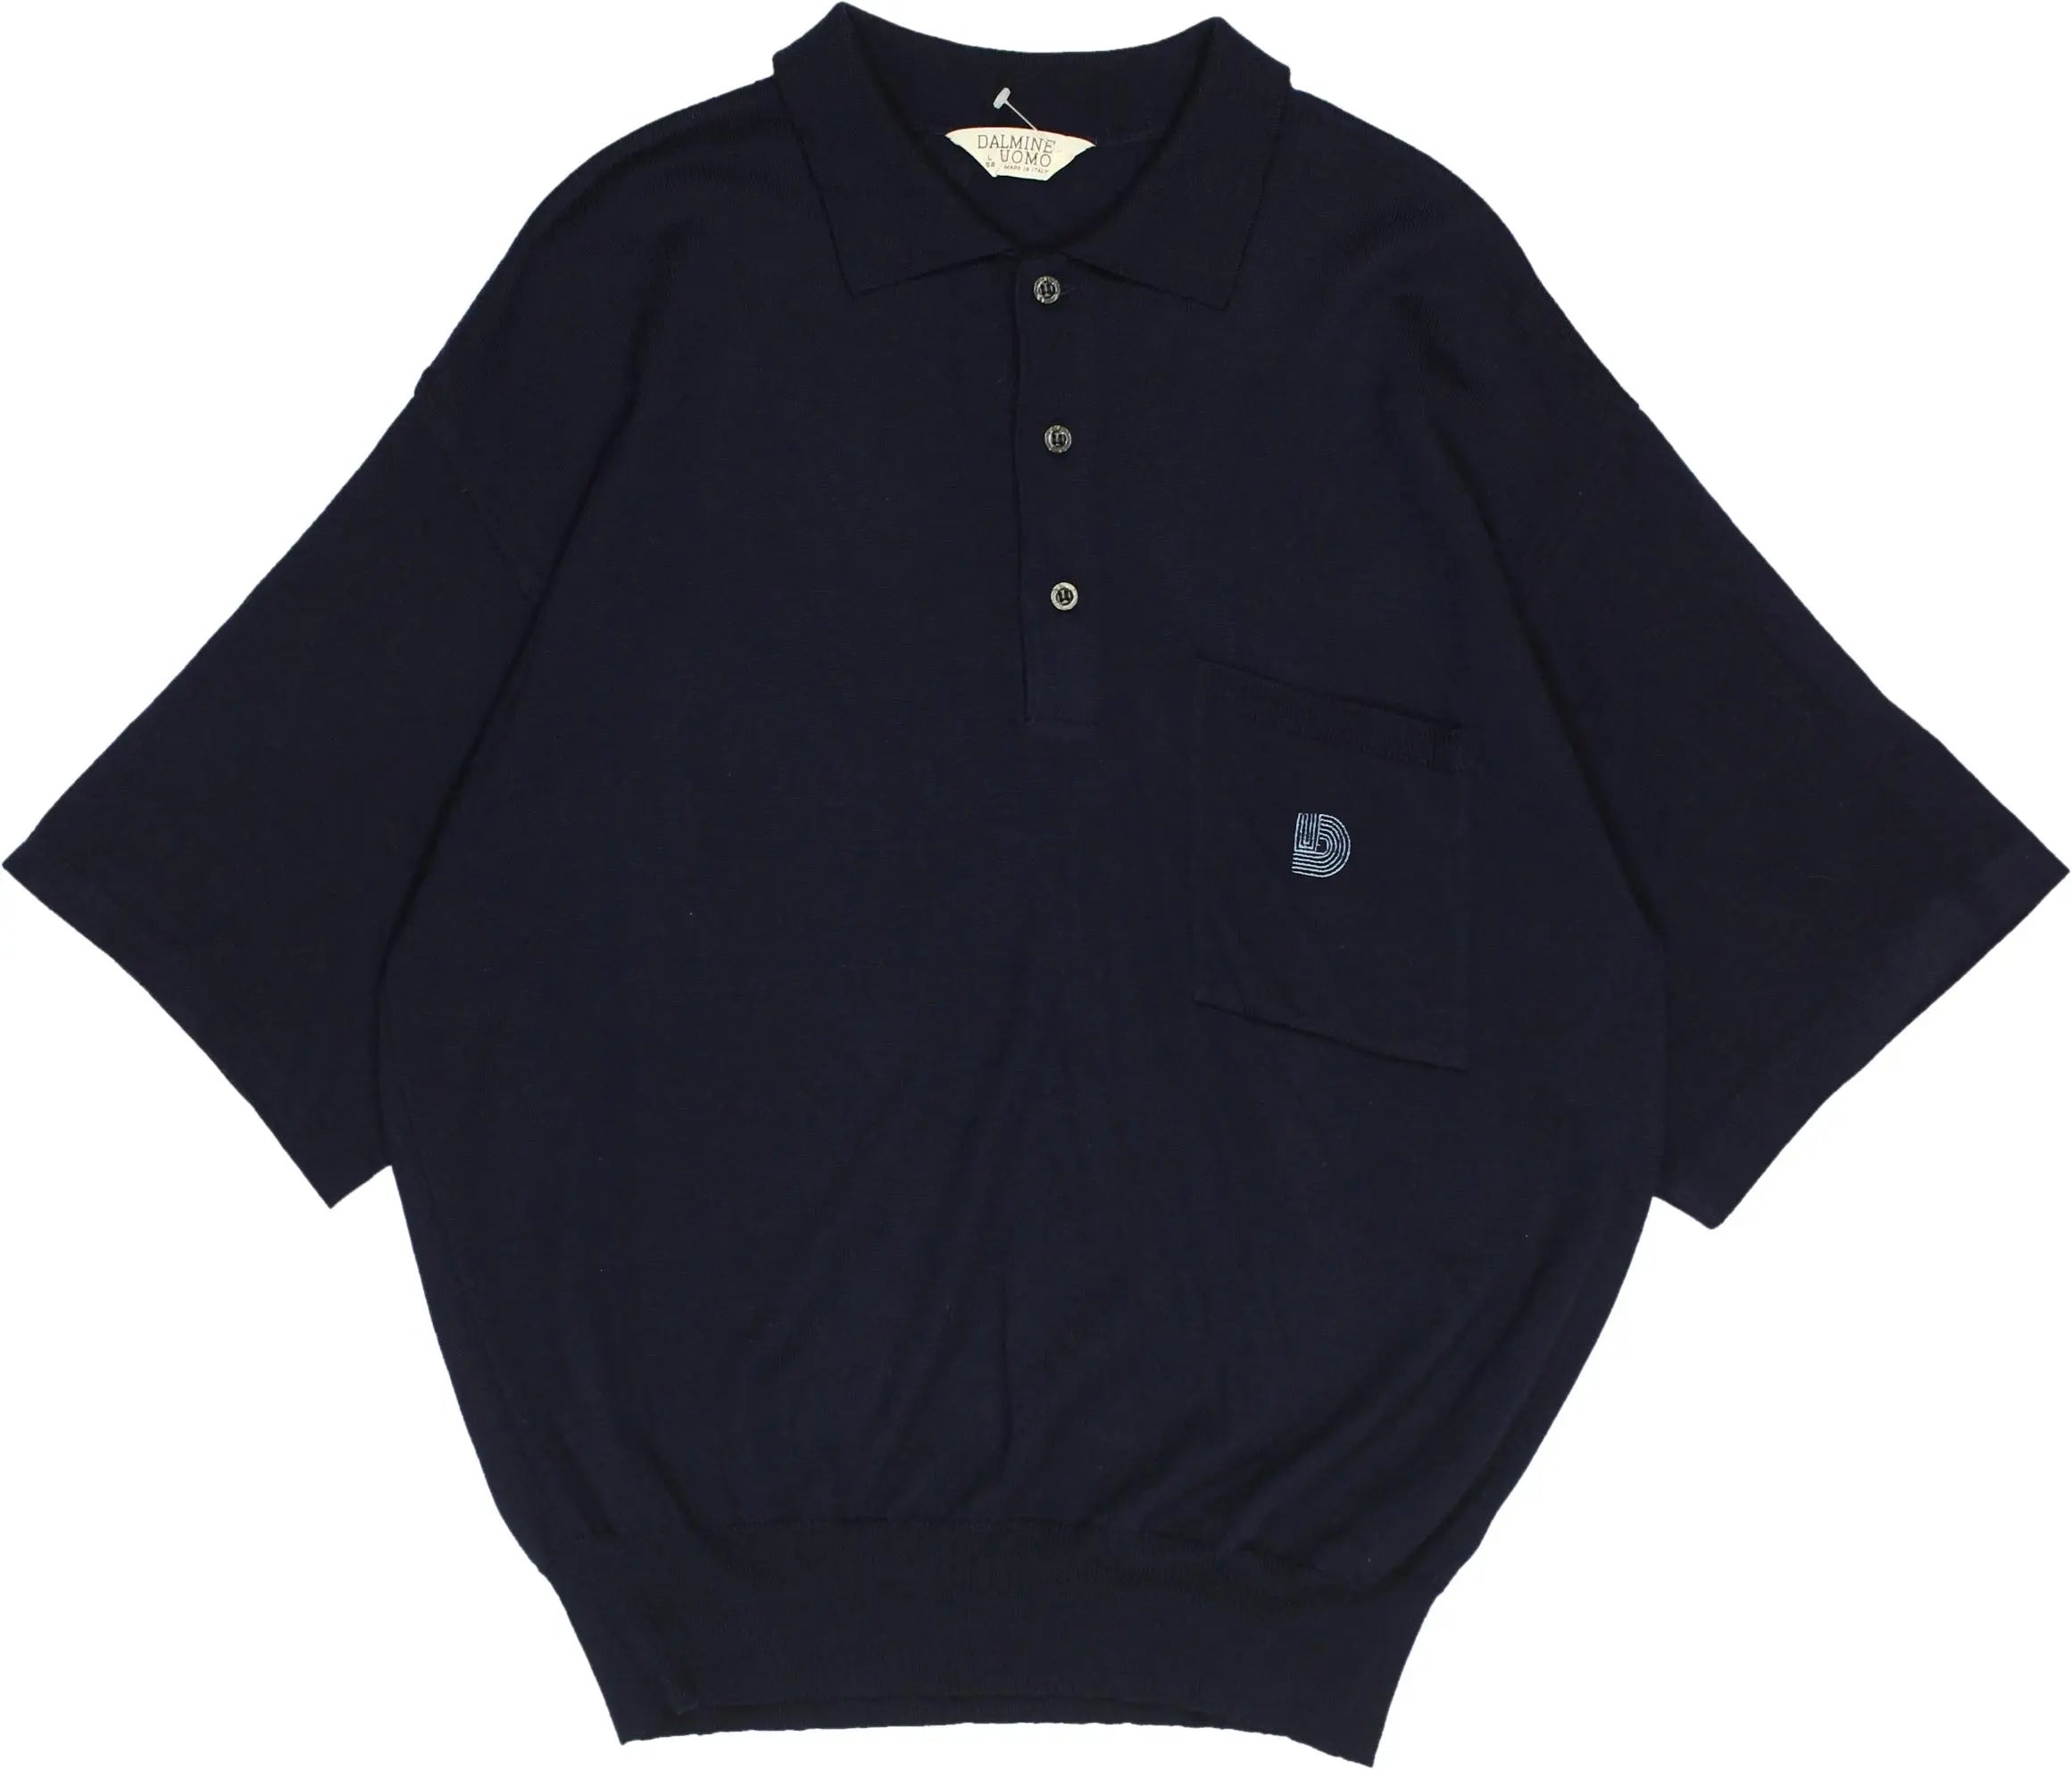 Dalmine Uomo - Polo- ThriftTale.com - Vintage and second handclothing